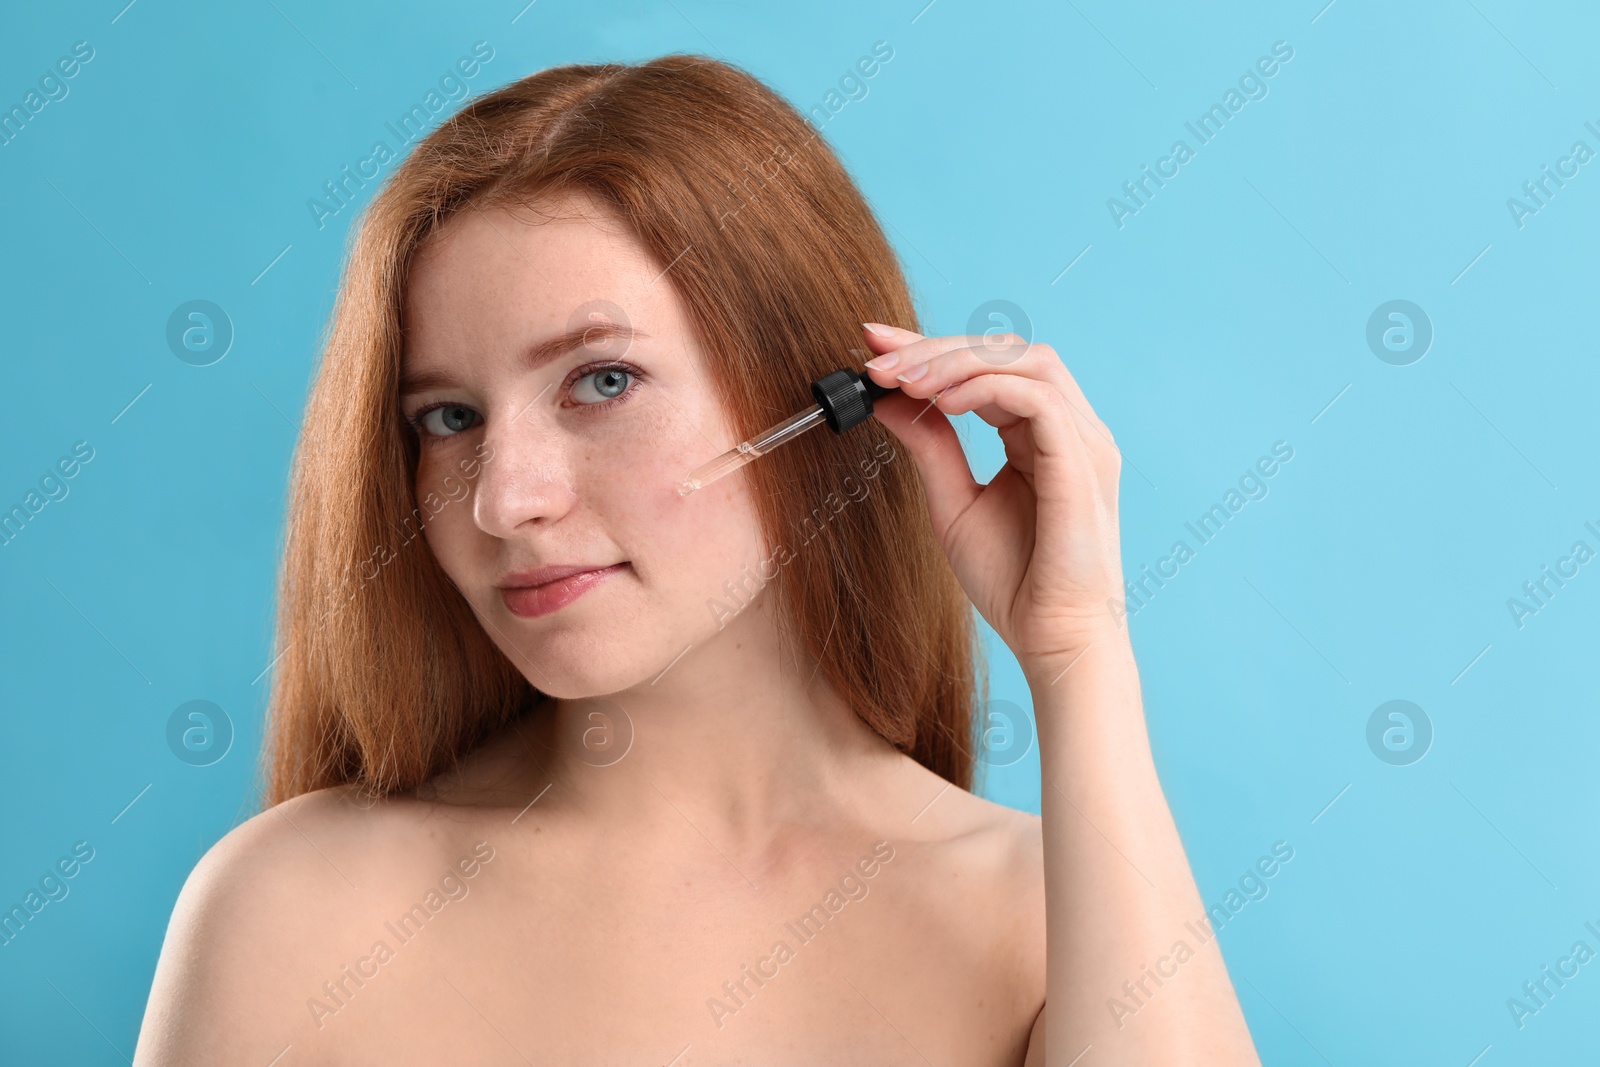 Photo of Beautiful woman with freckles applying cosmetic serum onto her face against light blue background. Space for text